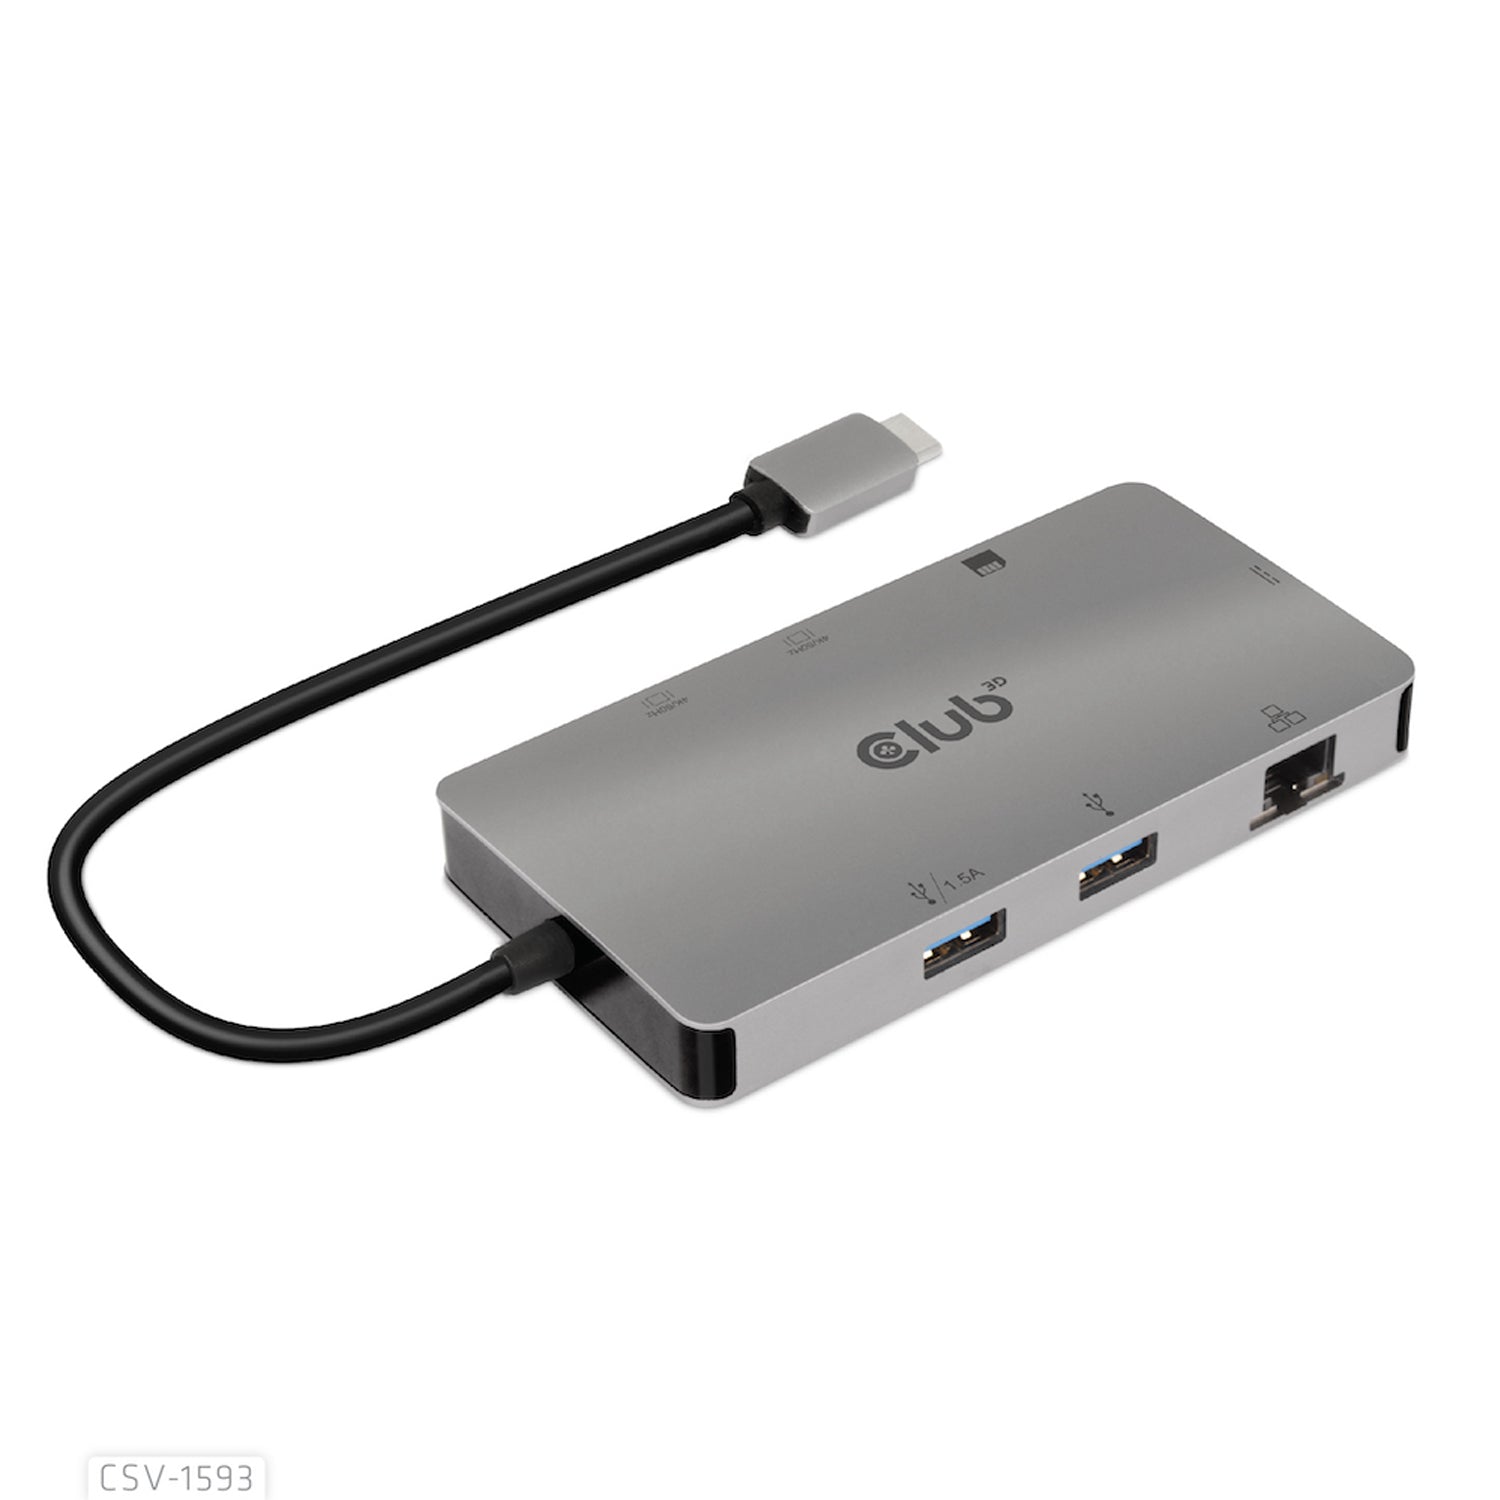 Club3D CSV1593 USB-C 3.2 Gen 1 8-in-1 Hub with 2X HDMI/2X USB/RJ45/SD/Micro SD Card Slots and USB-C Female Port